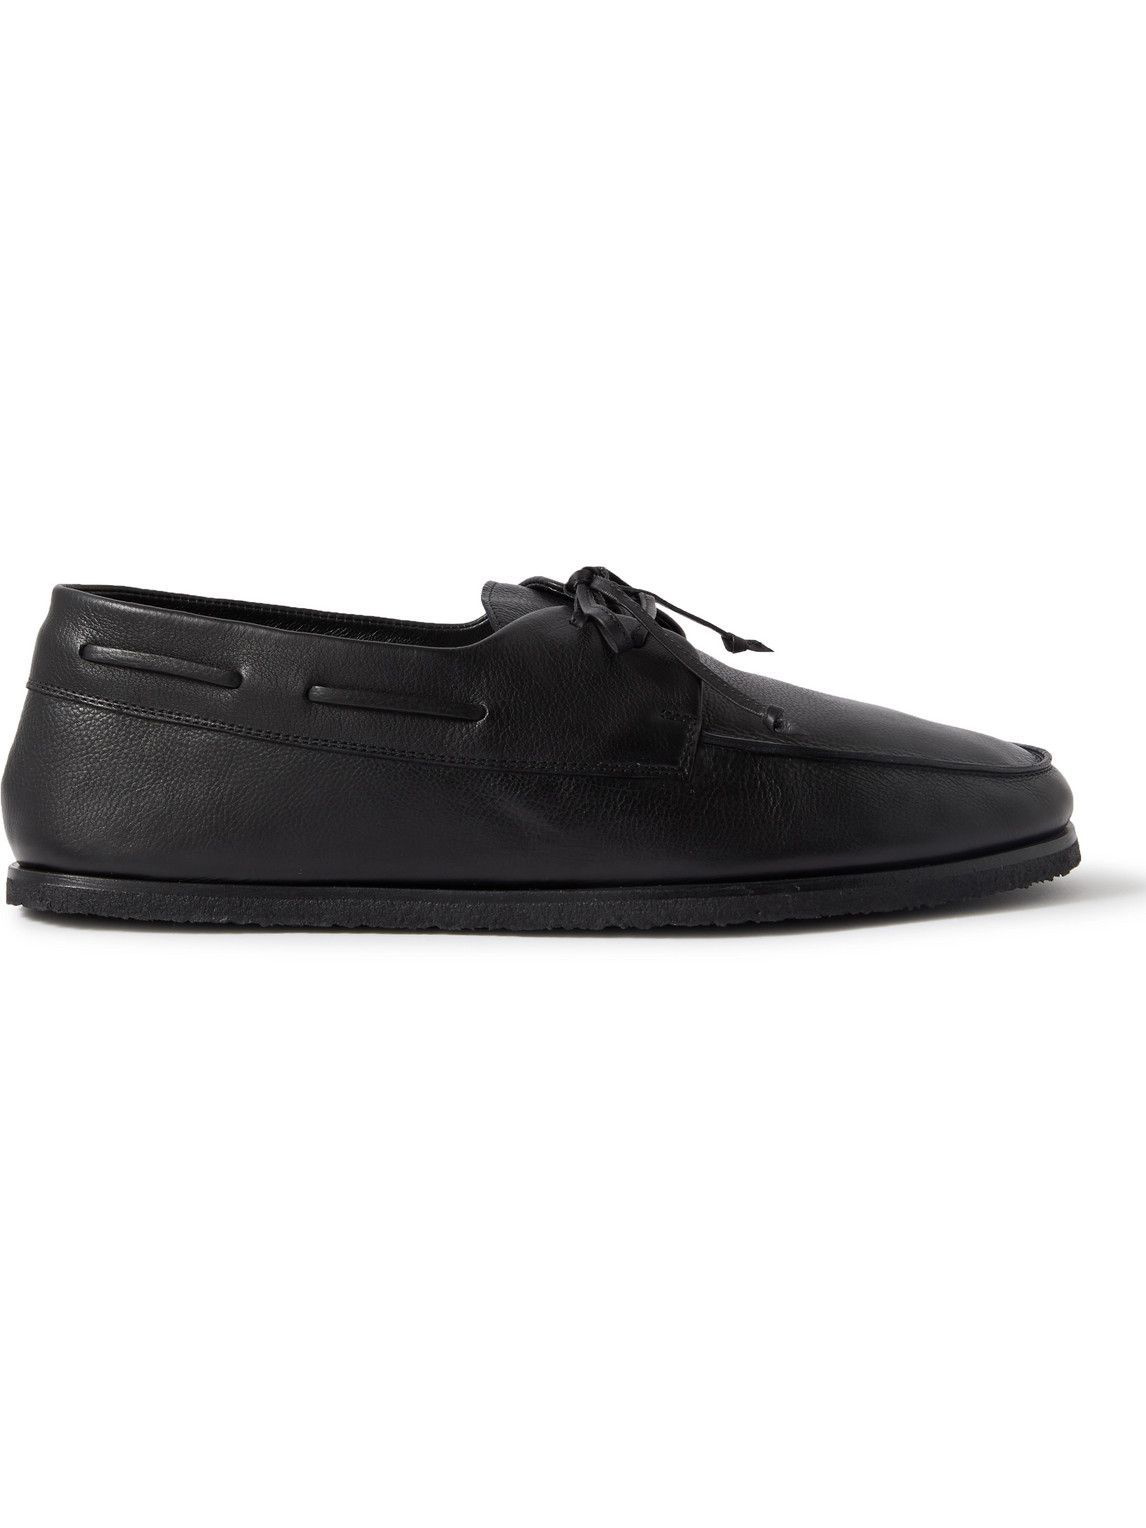 The Row - Sailor Full-Grain Leather Boat Shoes - Black The Row